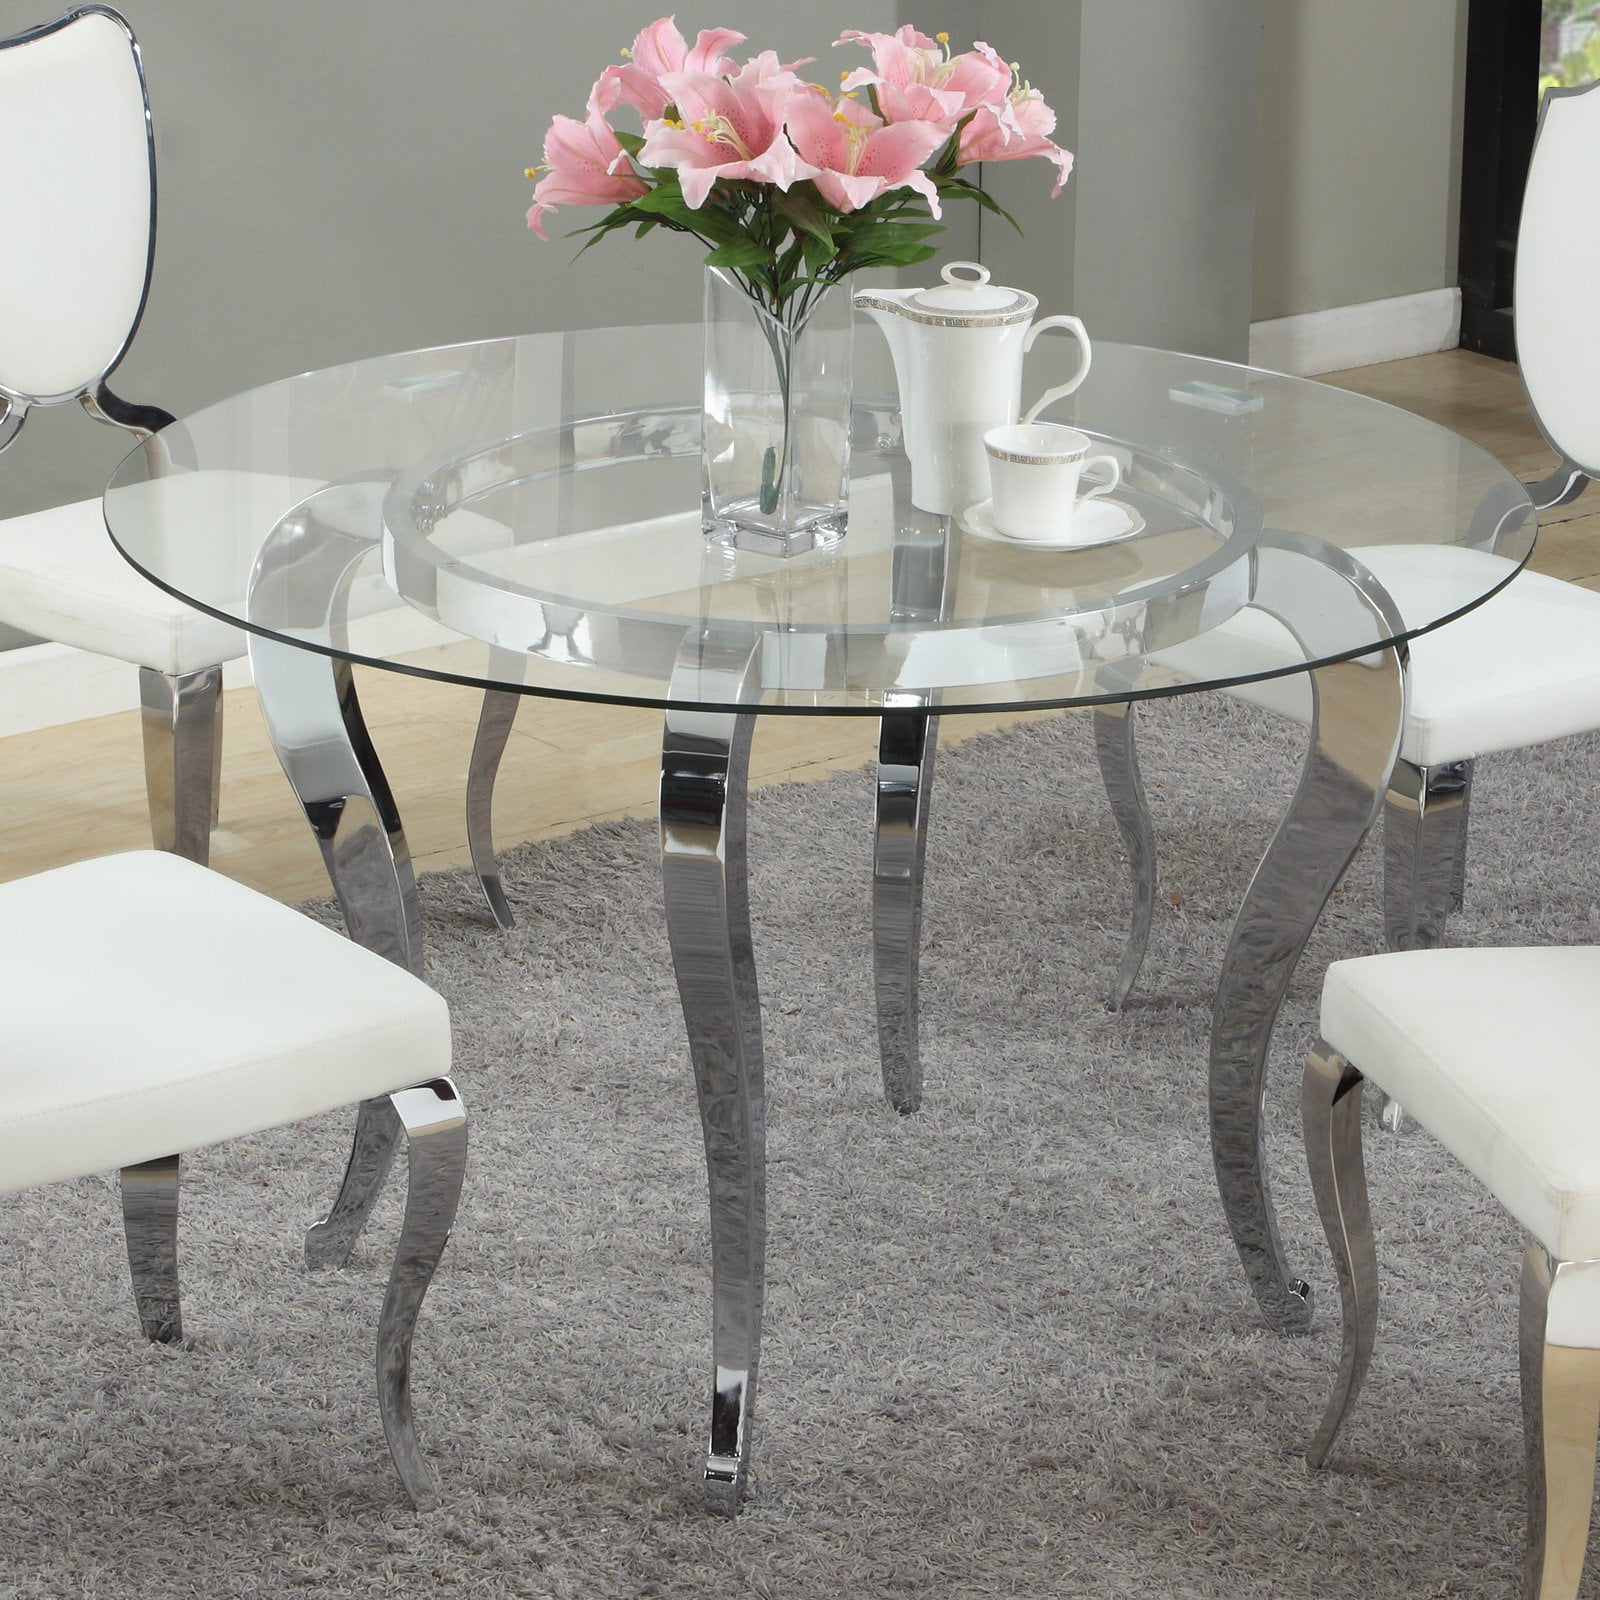 Chintaly Letty Glass Top Dining Table - Walmart.com - Walmart.com